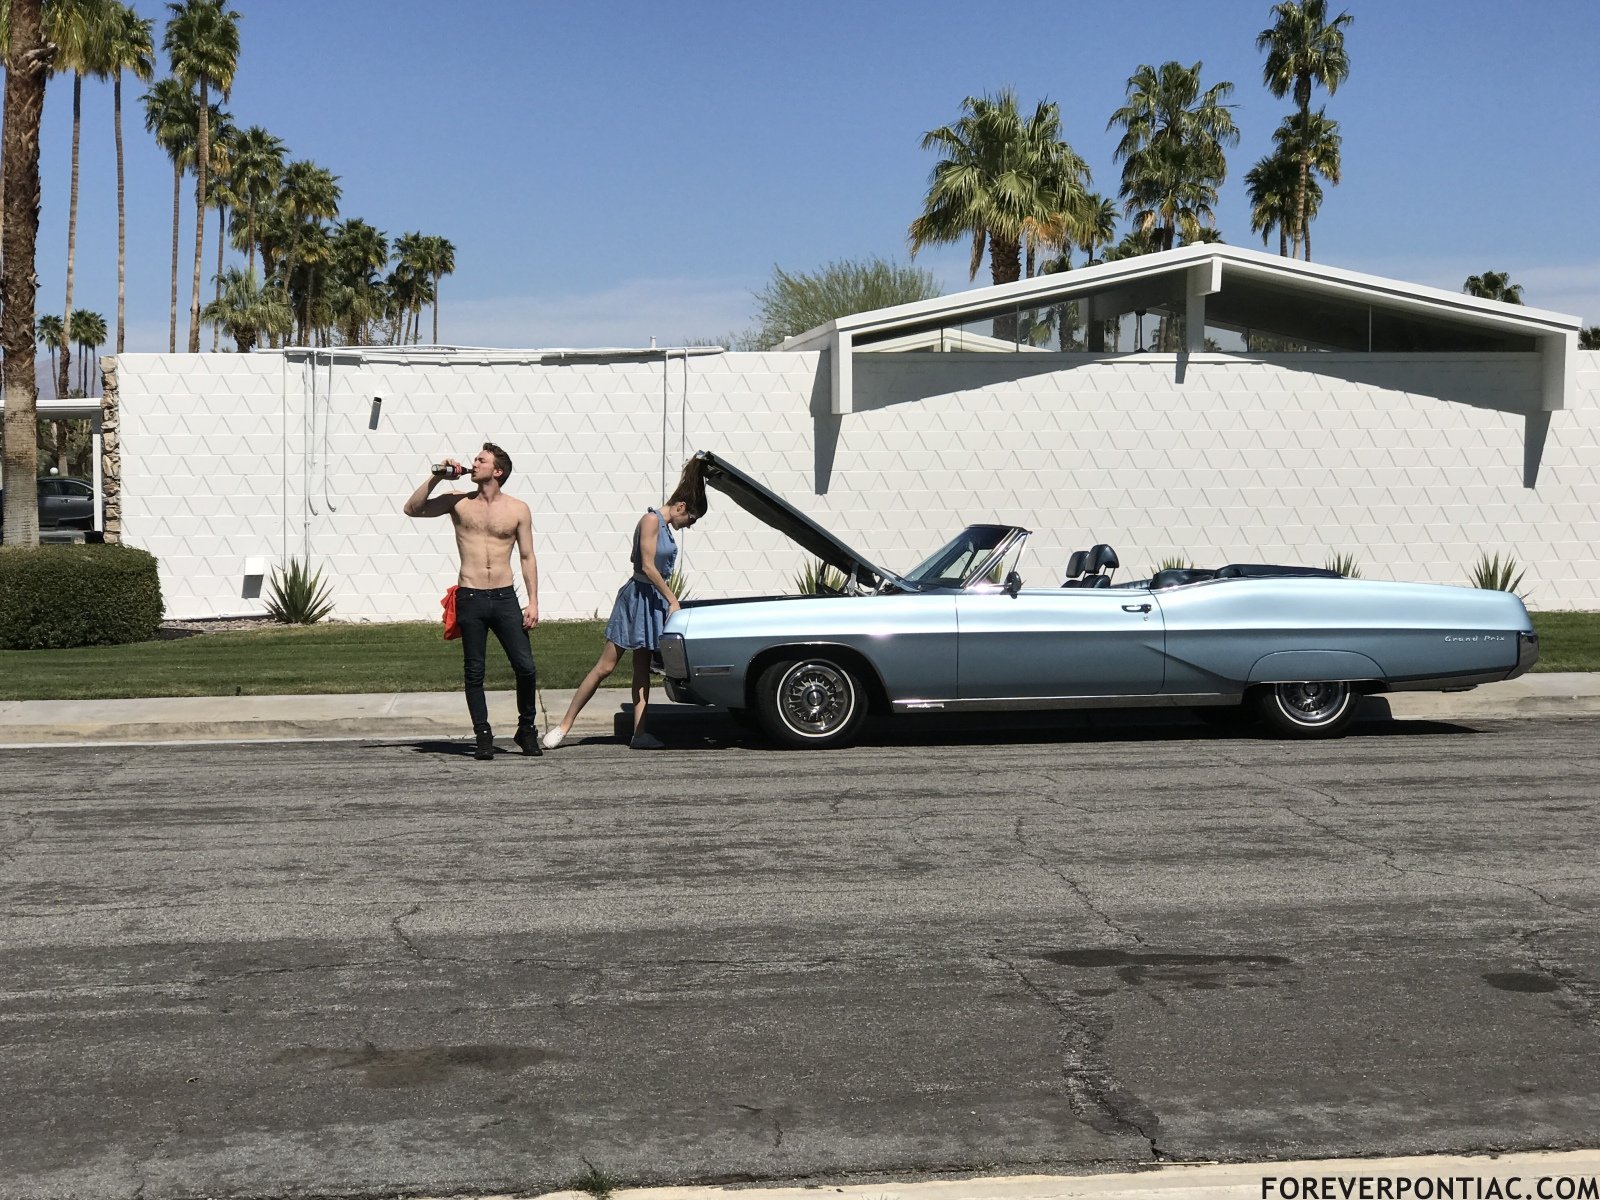 1967 Grand Prix convertible as prop in photo shoot, Palm Springs, March 2017